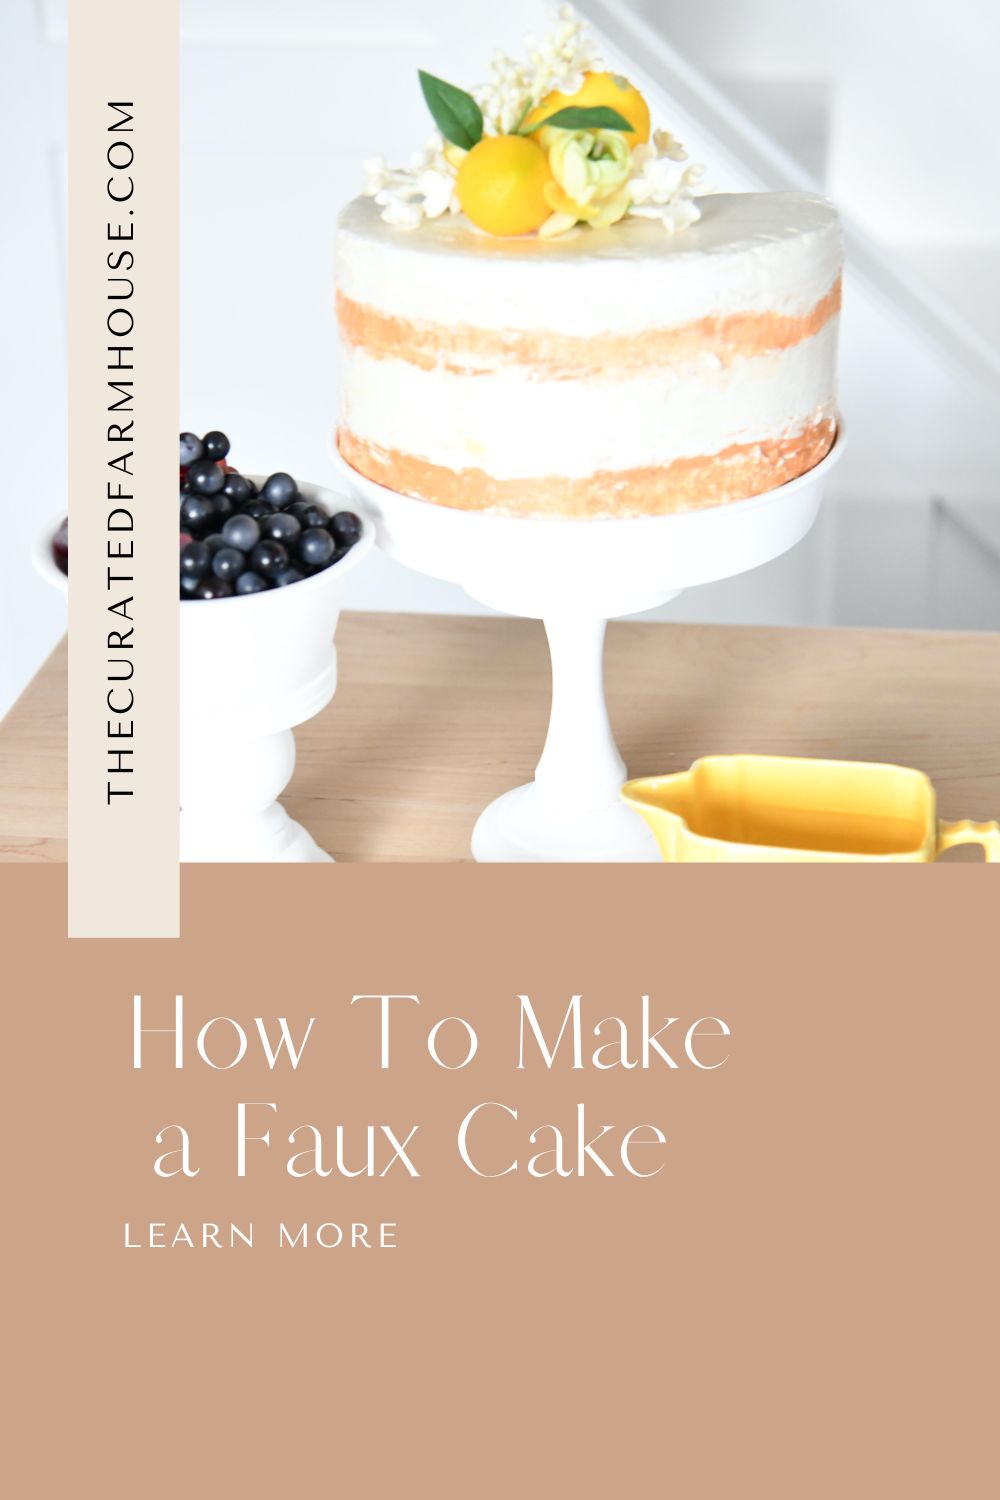 How To Make a Faux Cake